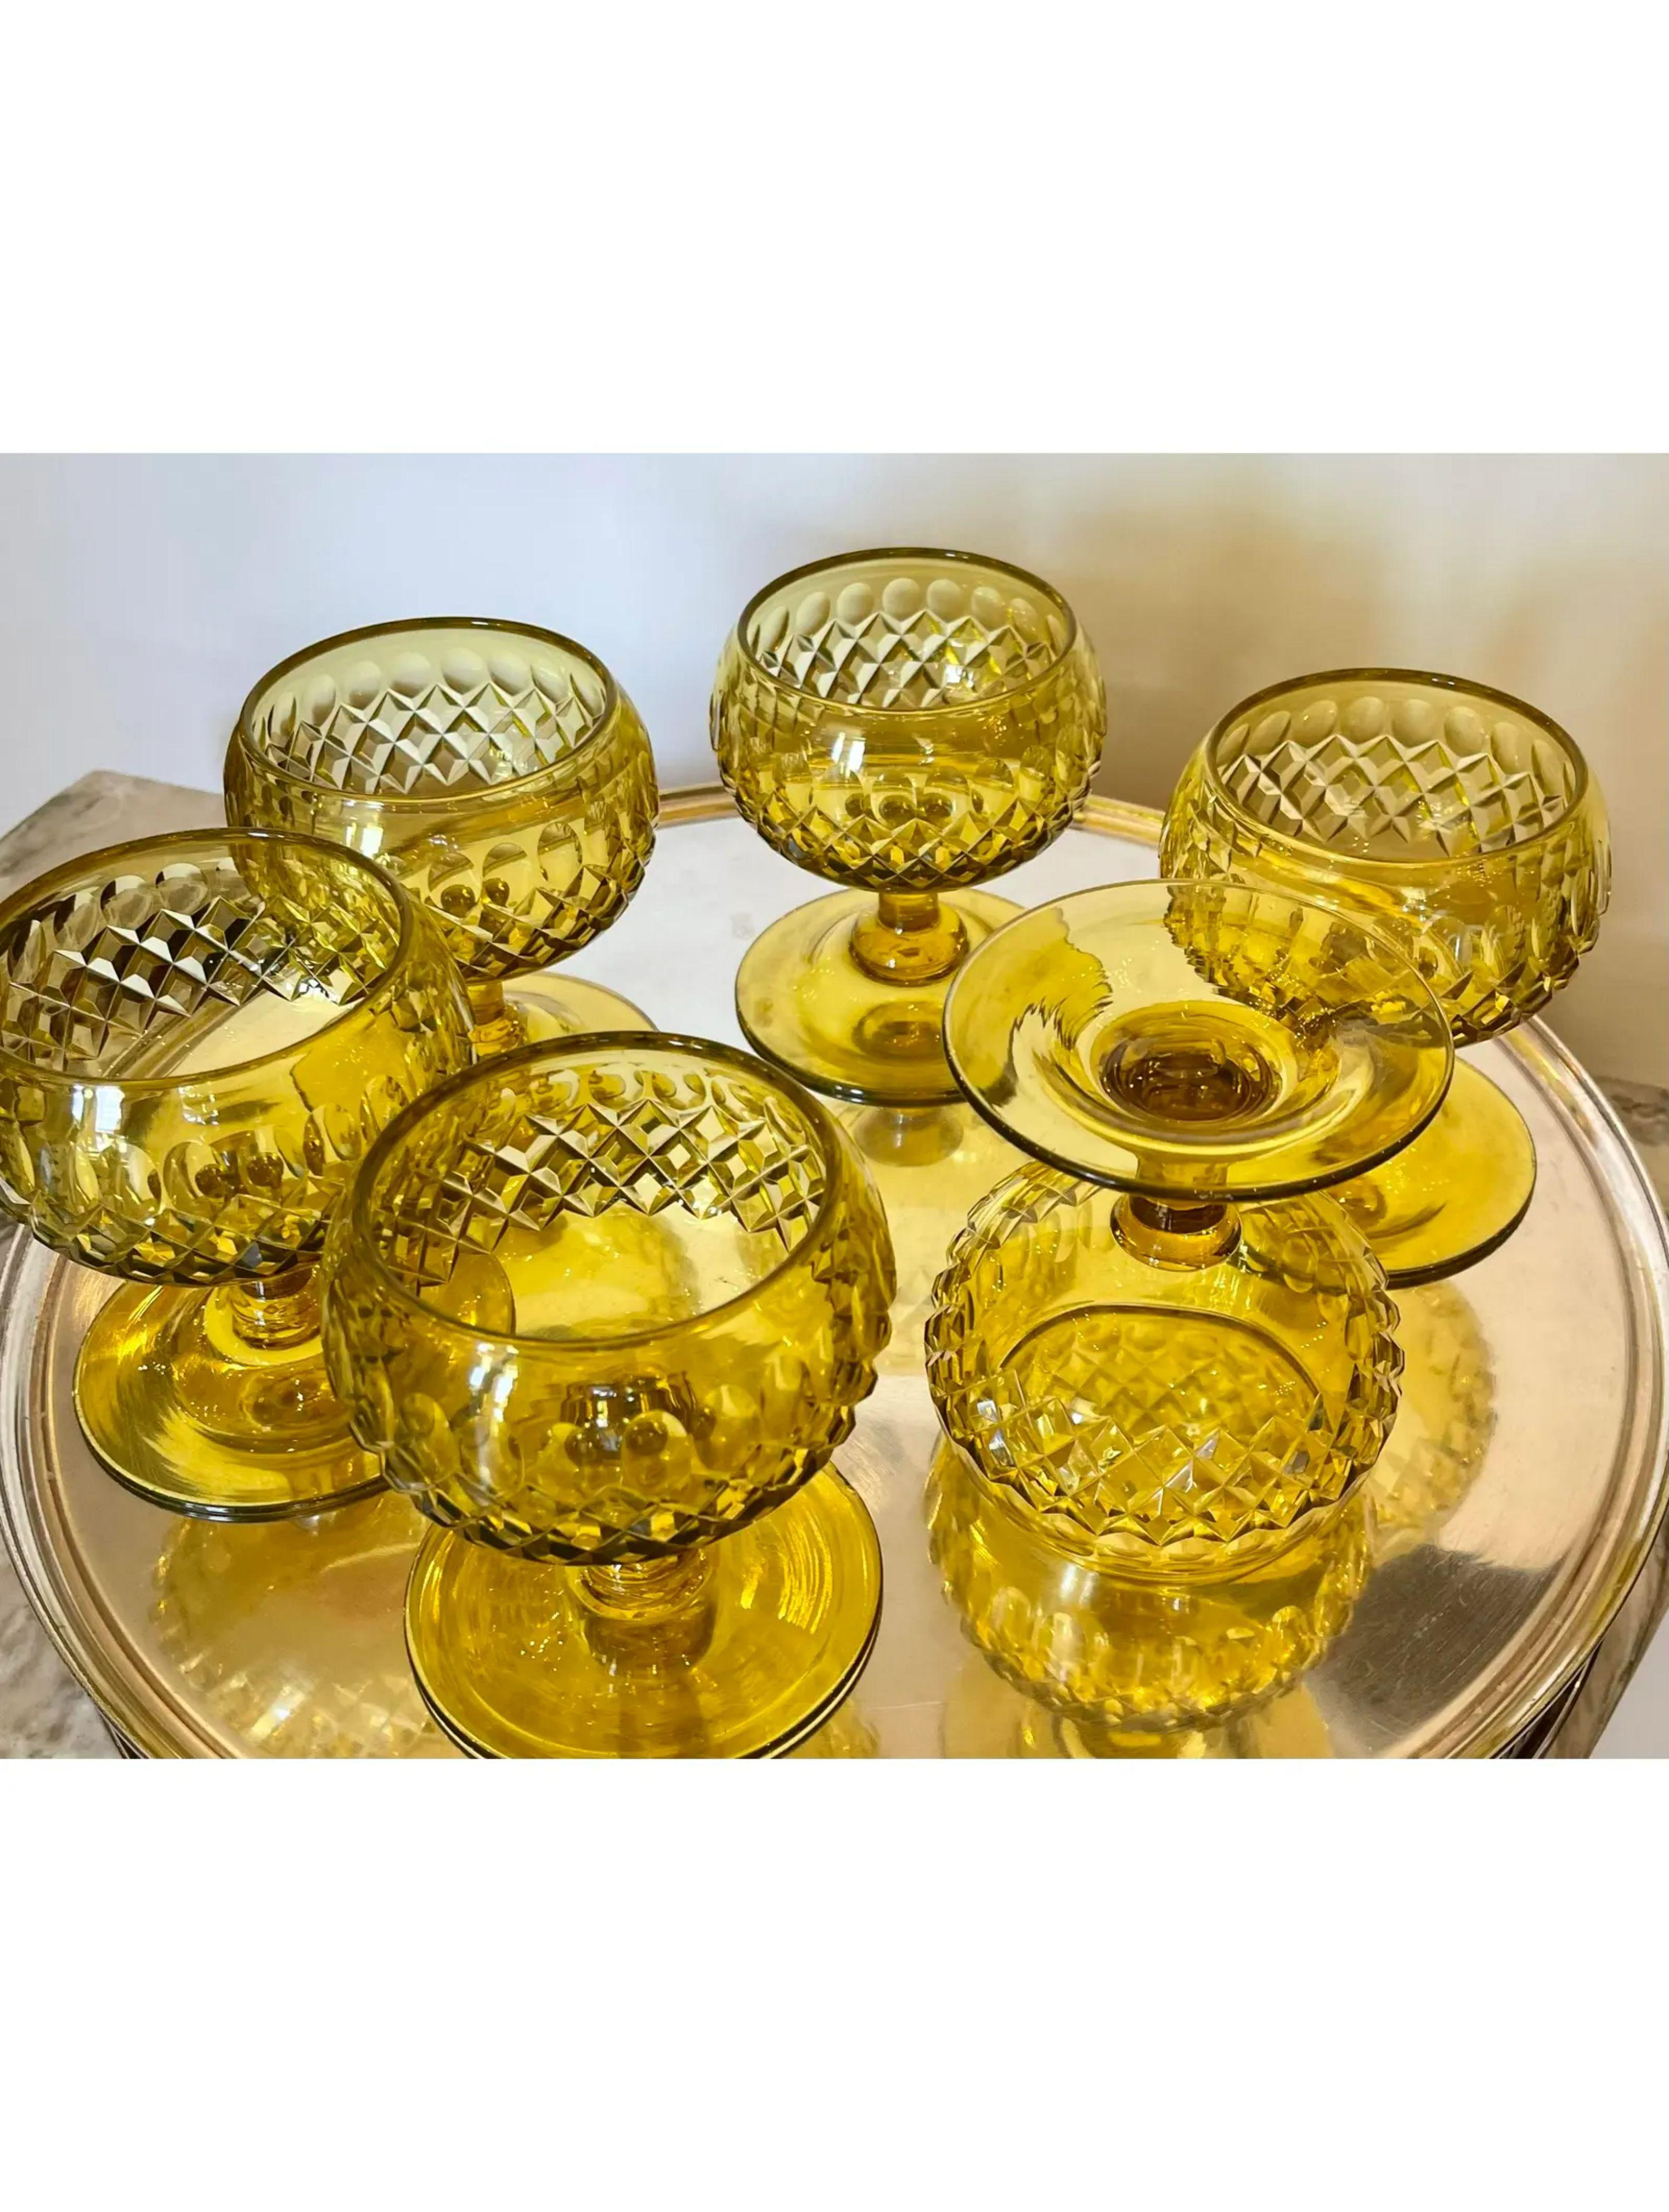 Antique Frederick Carder for Steuben yellow crystal desert compotes - set of 6

Additional information: 
Materials: crystal
Color: yellow
Brand: Steuben Glass
Designer: Steuben
Period: 1920s
Styles: Art Deco
Item type: vintage, antique or